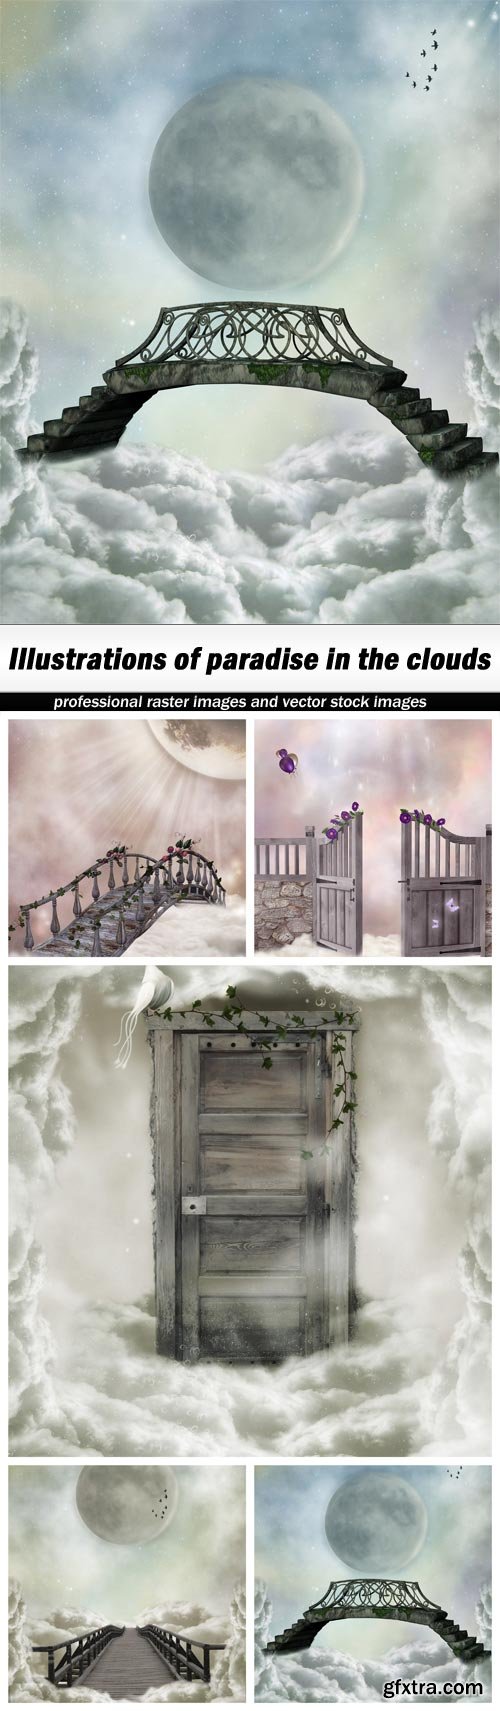 Illustrations of paradise in the clouds - 5 UHQ JPEG